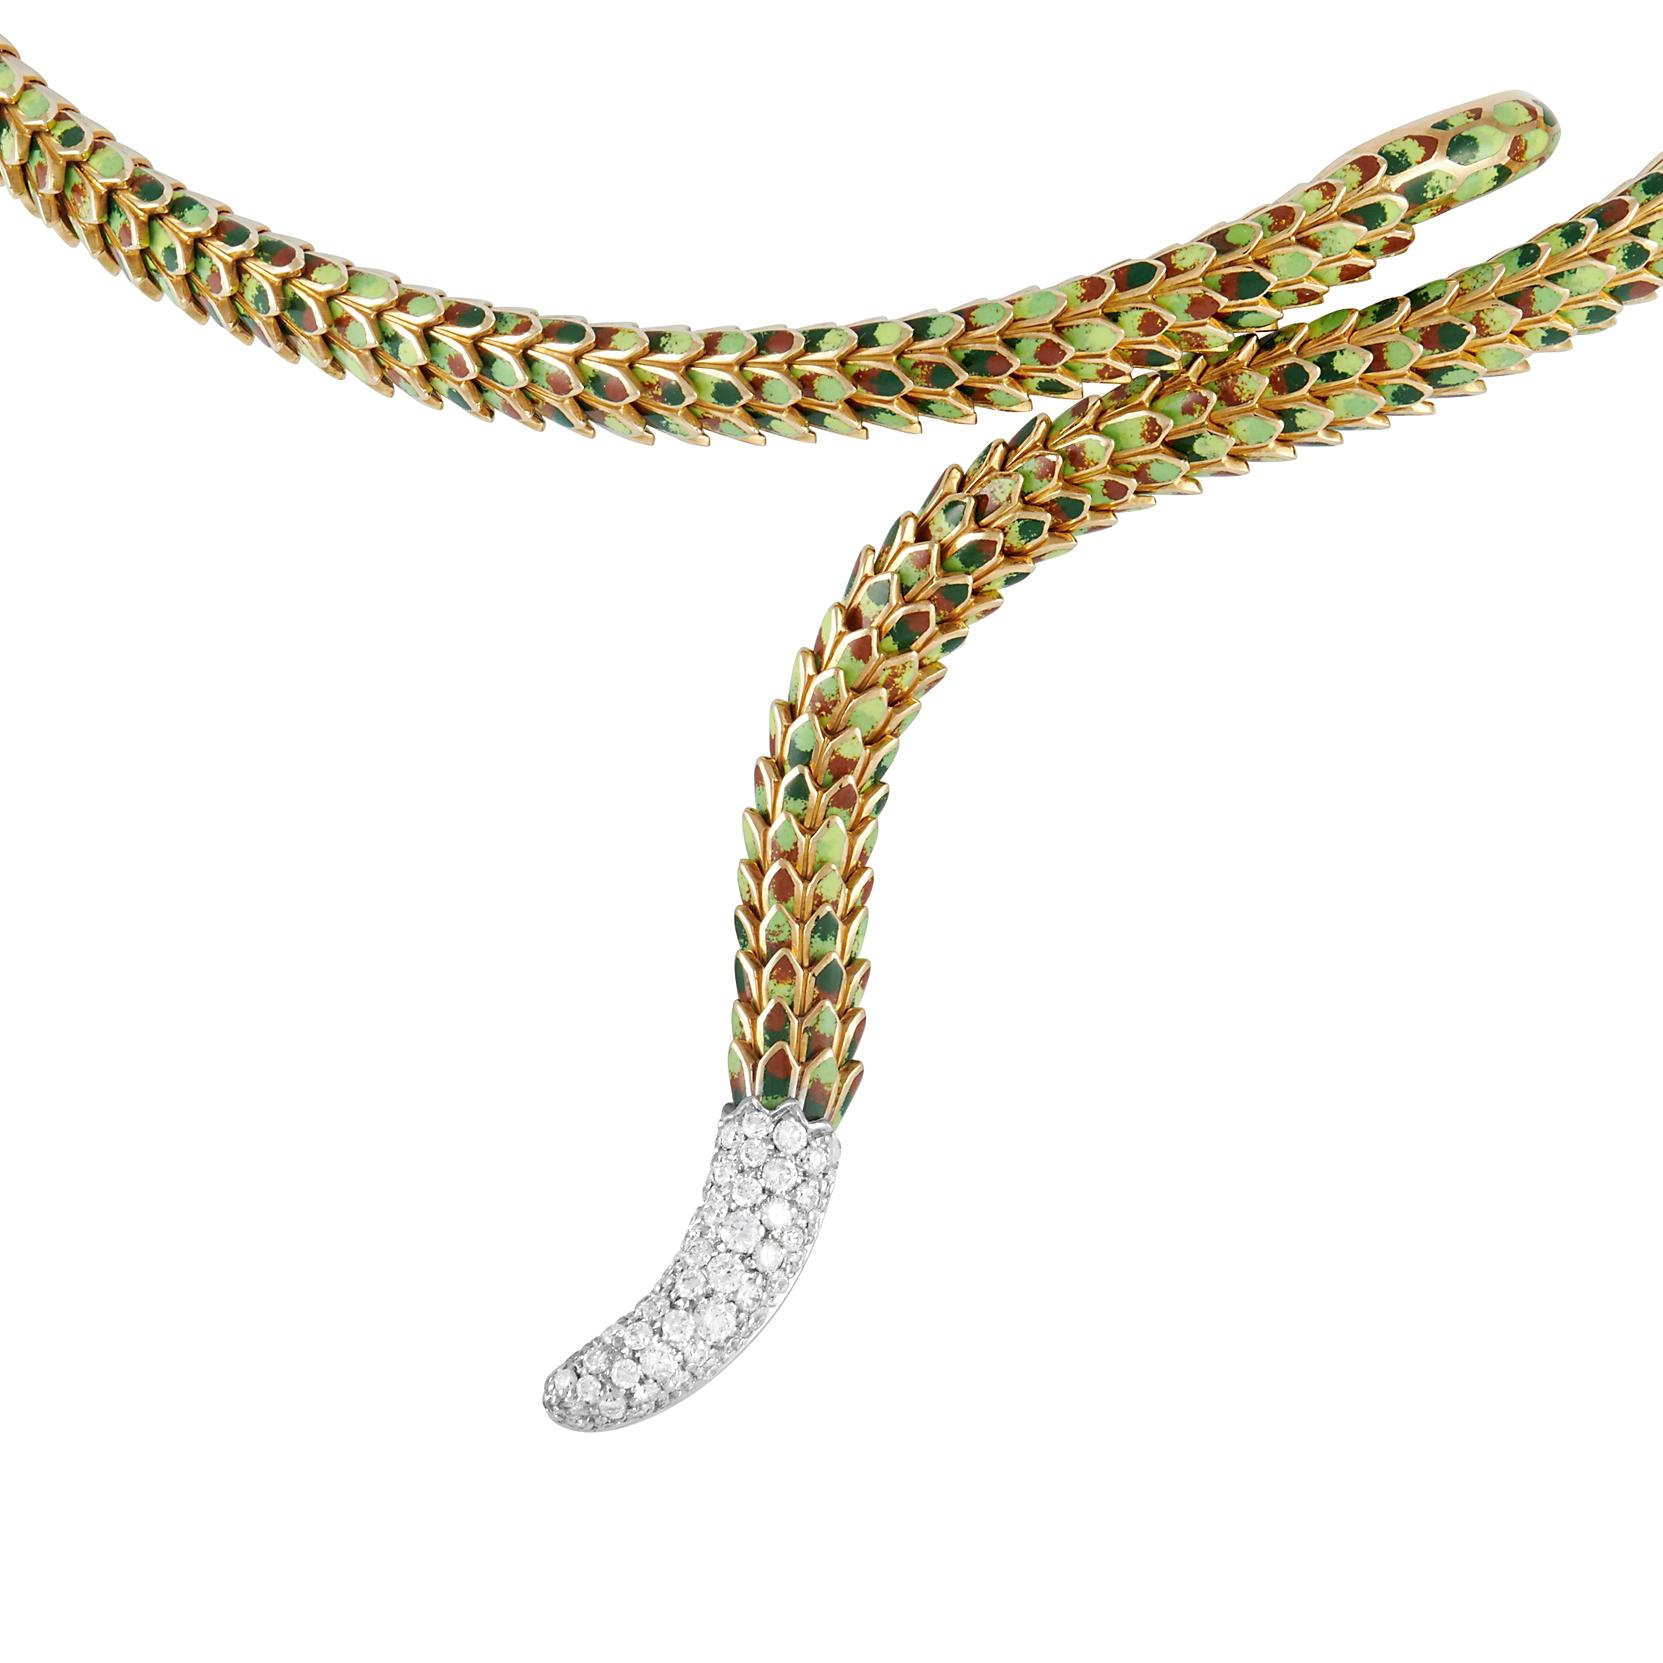 Round Cut Roberto Coin 18k Yellow Gold 1.00 Ct Diamond and Enamel Viper Necklace